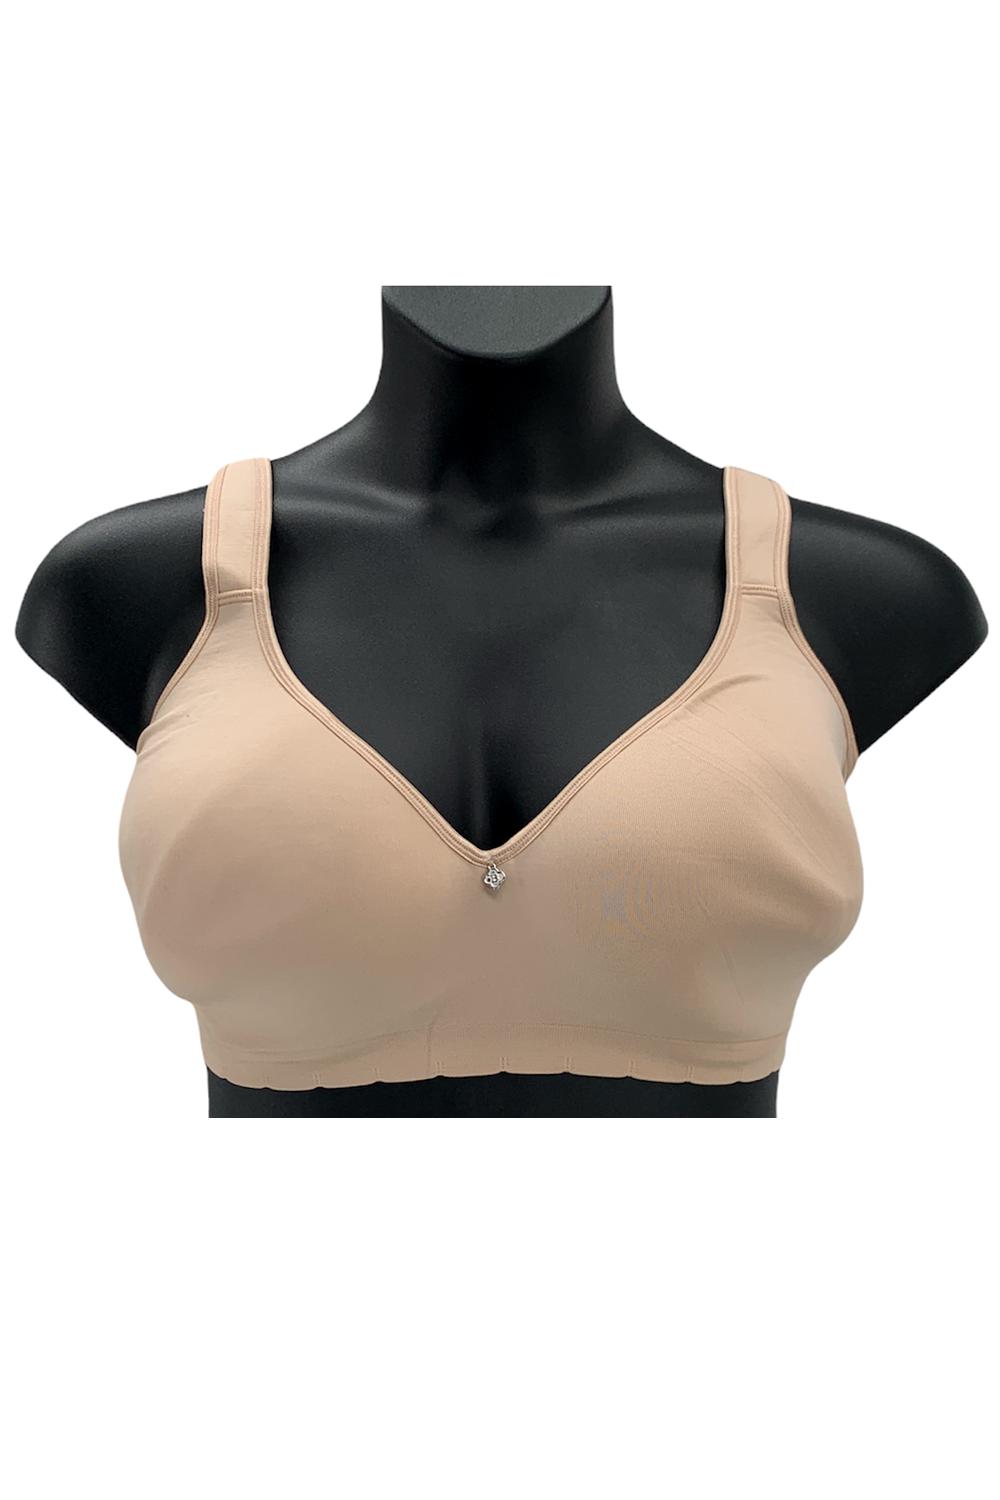 Breezies Seamless Long Line Wirefree Contour Bra Lace Band Natural